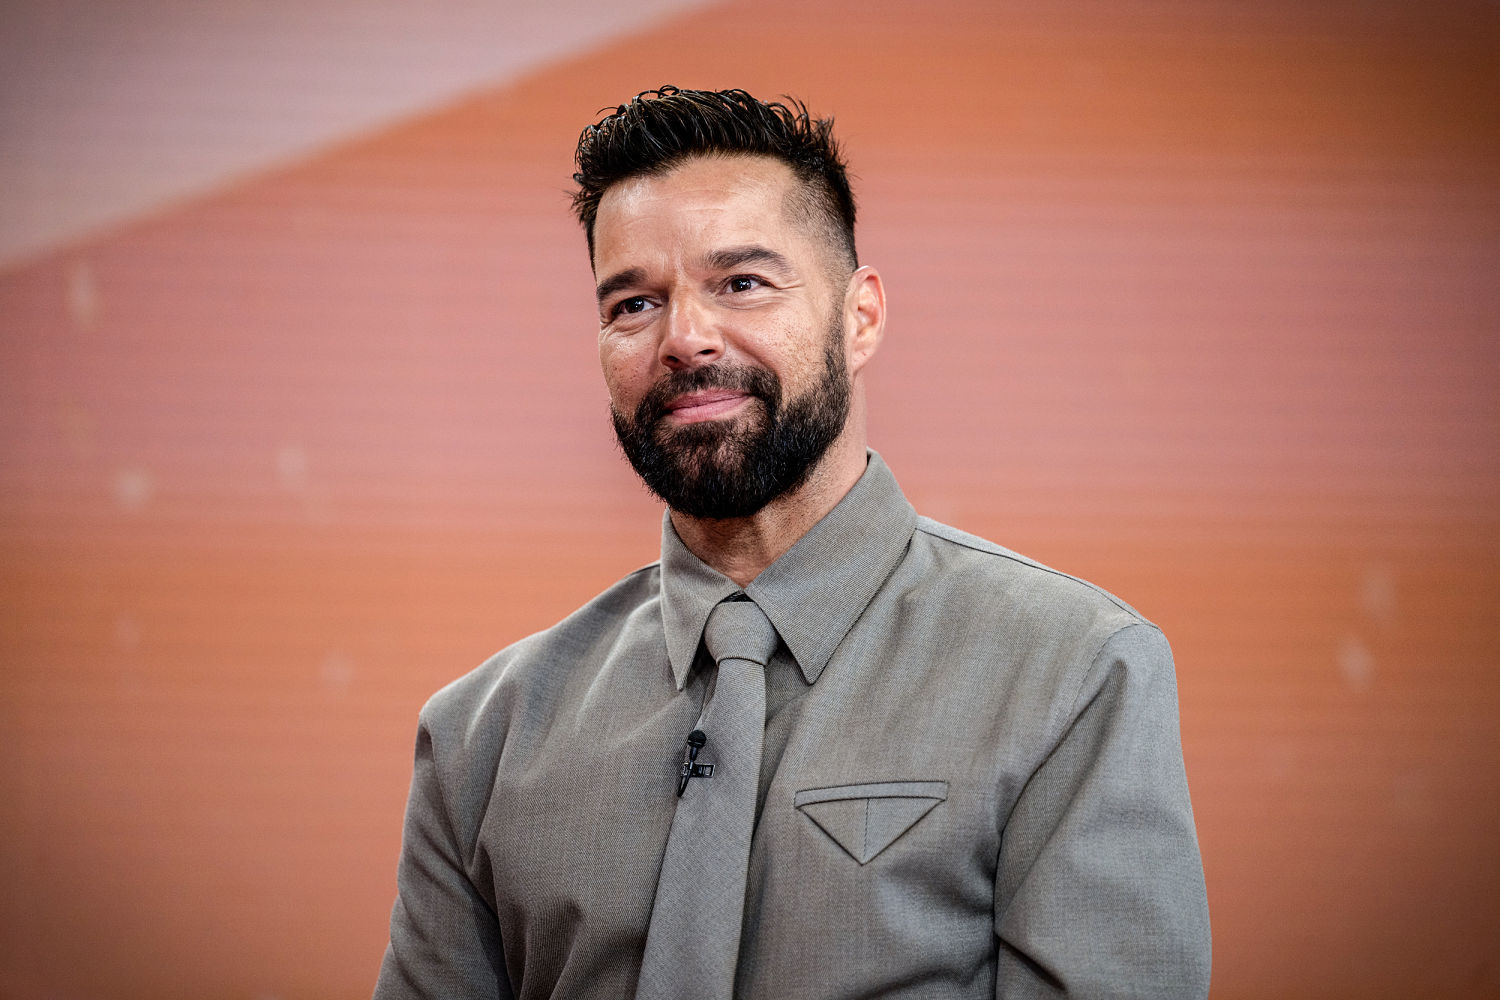 Ricky Martin reflects on his decision to come out publicly as gay